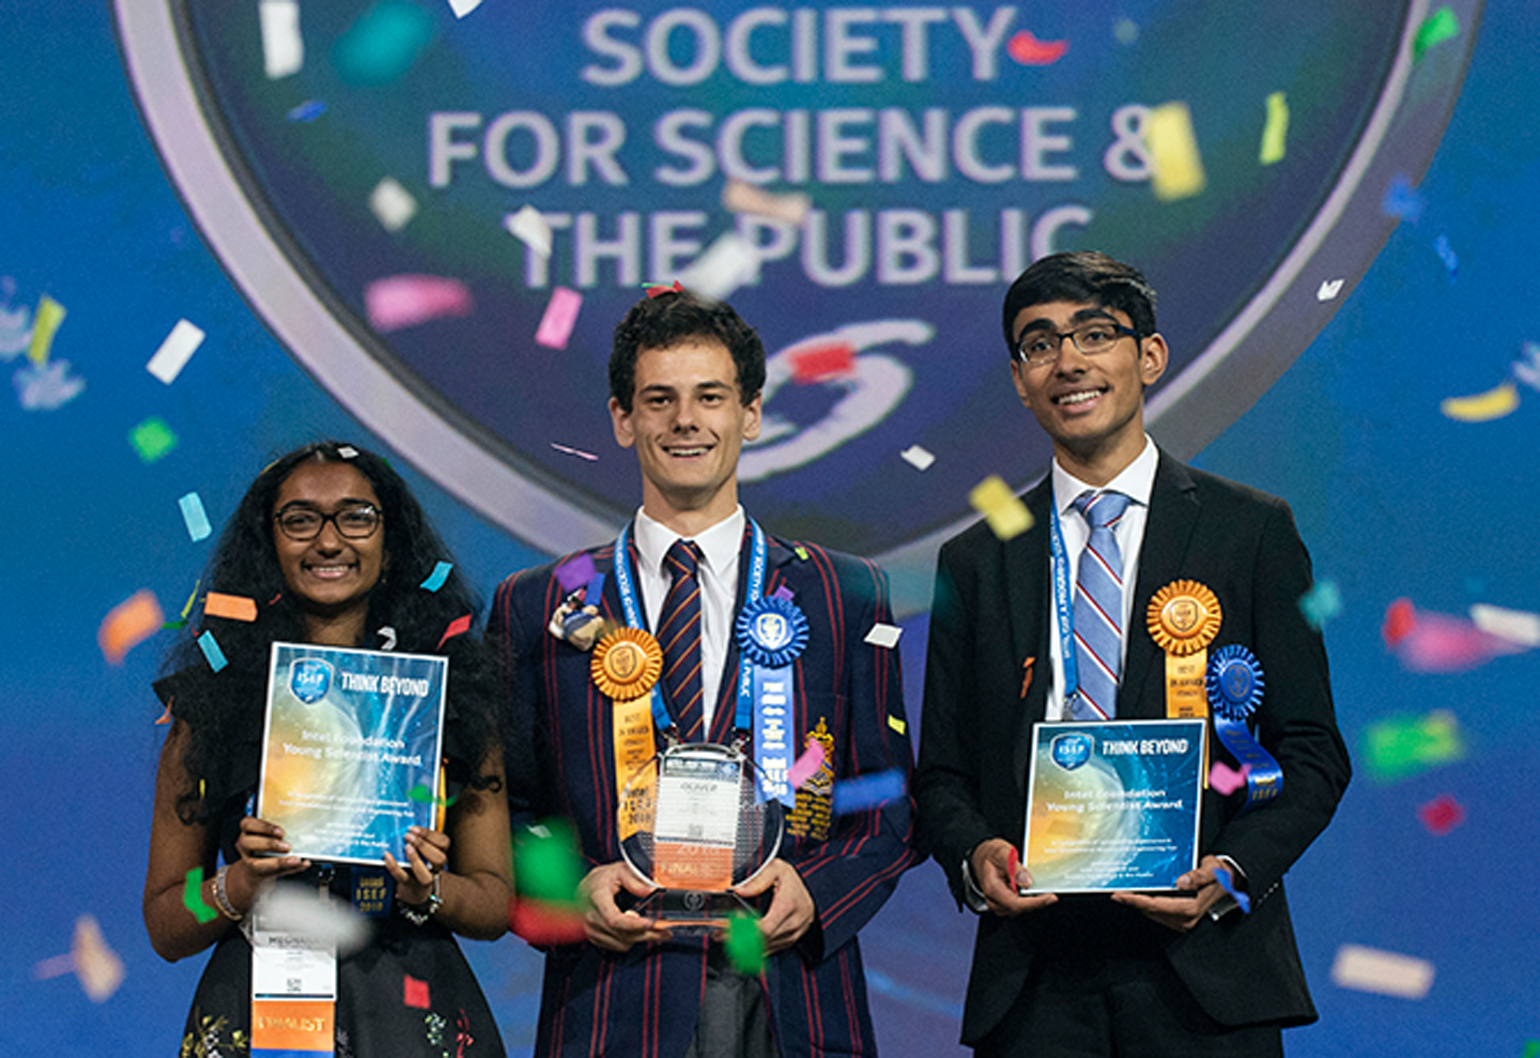 Australian students win big at the world's largest STEM competition